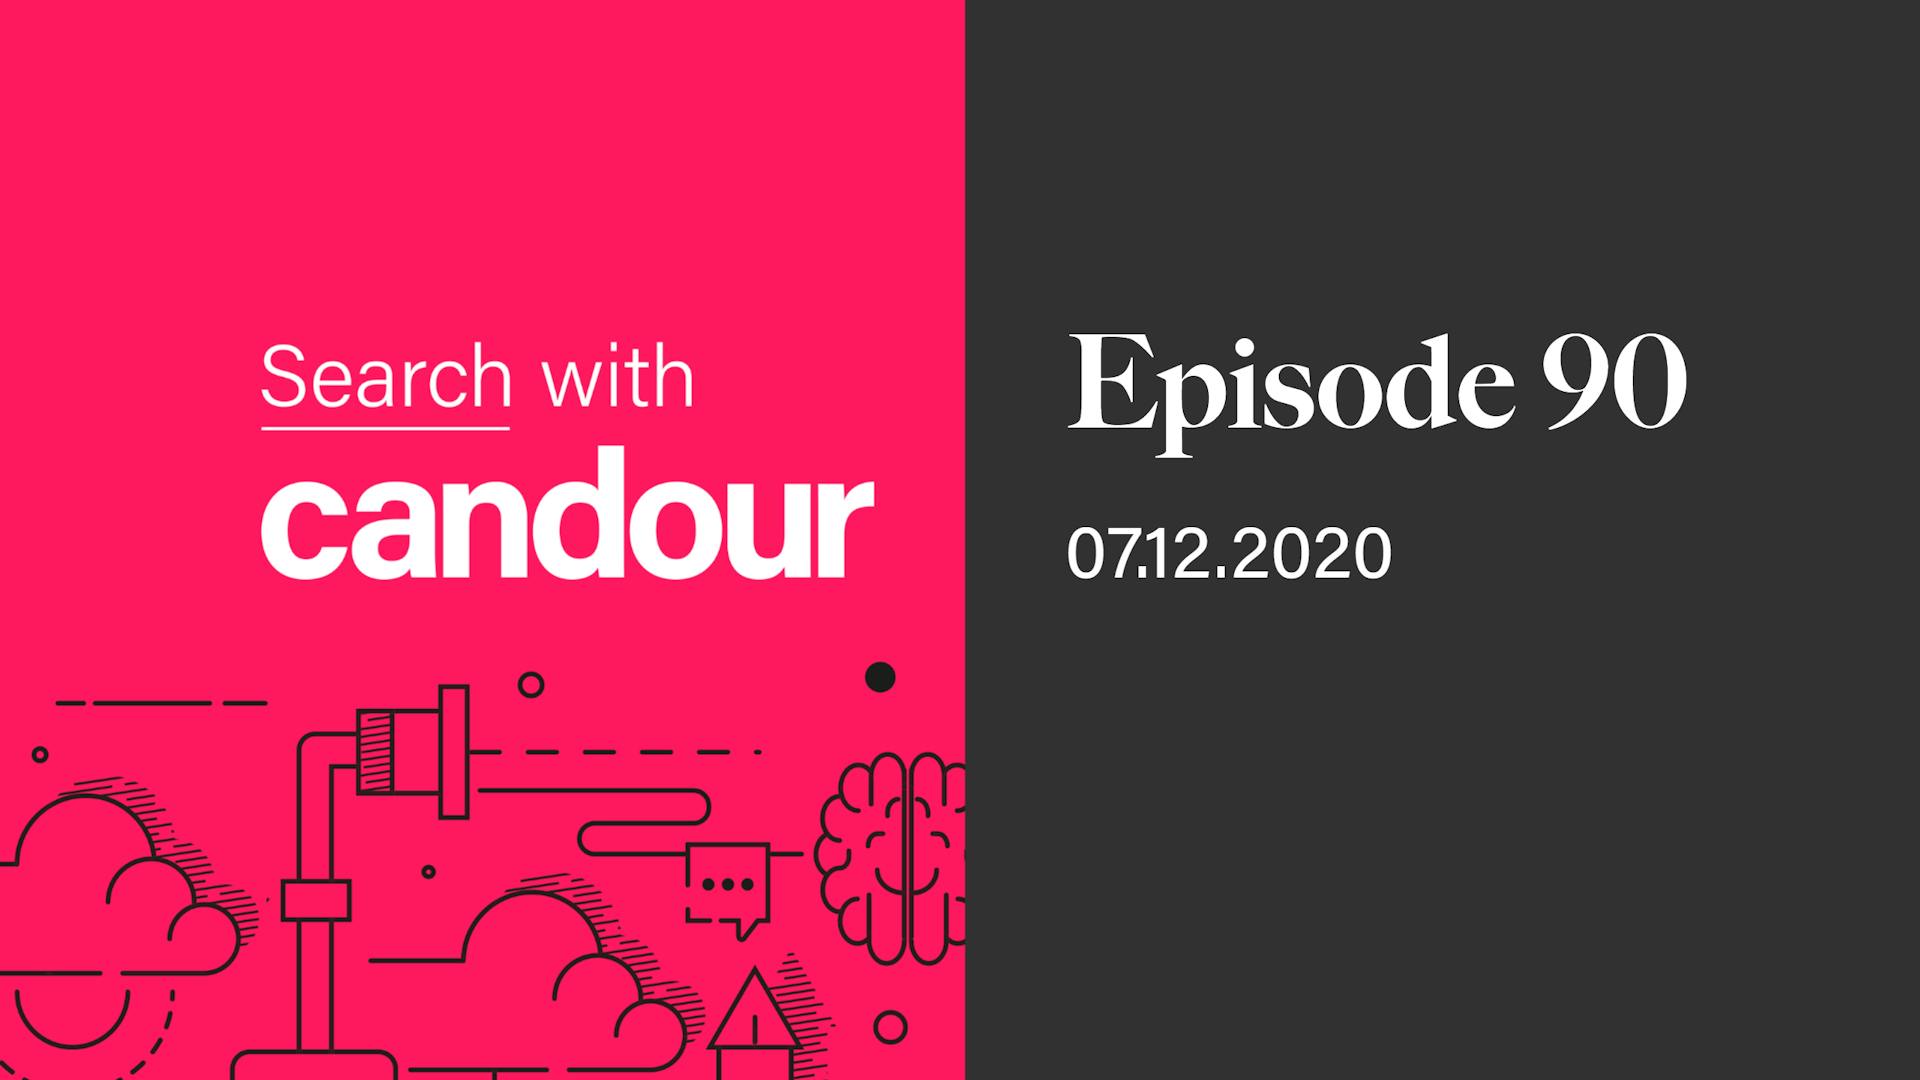 Episode 90 - Search with Candour